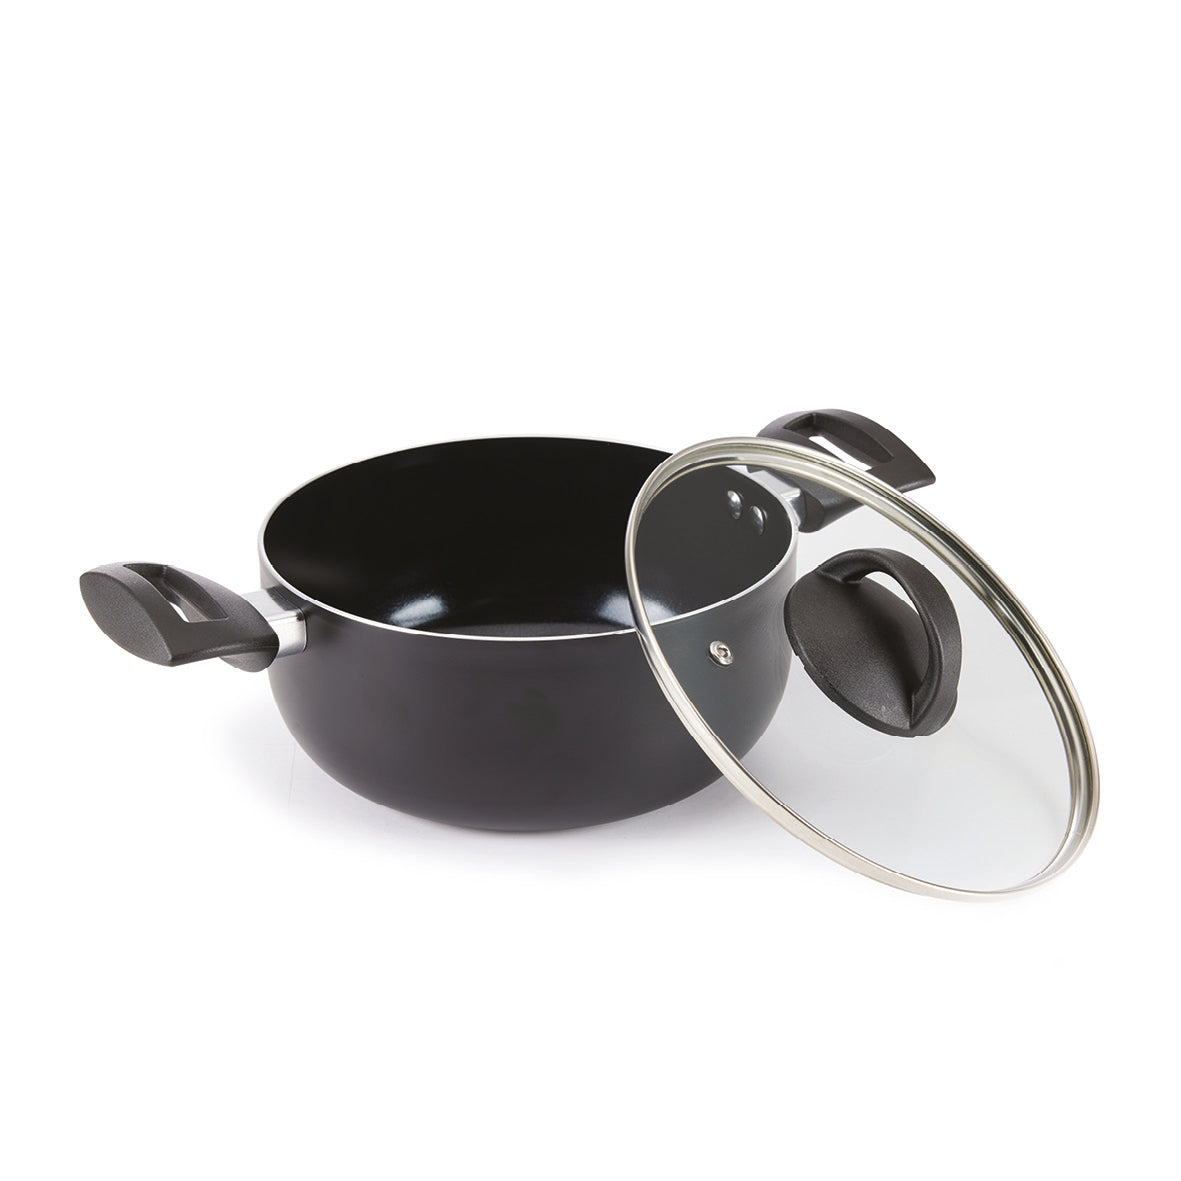 Set of 2 pots with lid Carbone Pro - ultra resistant and non-stick - aluminum - Black